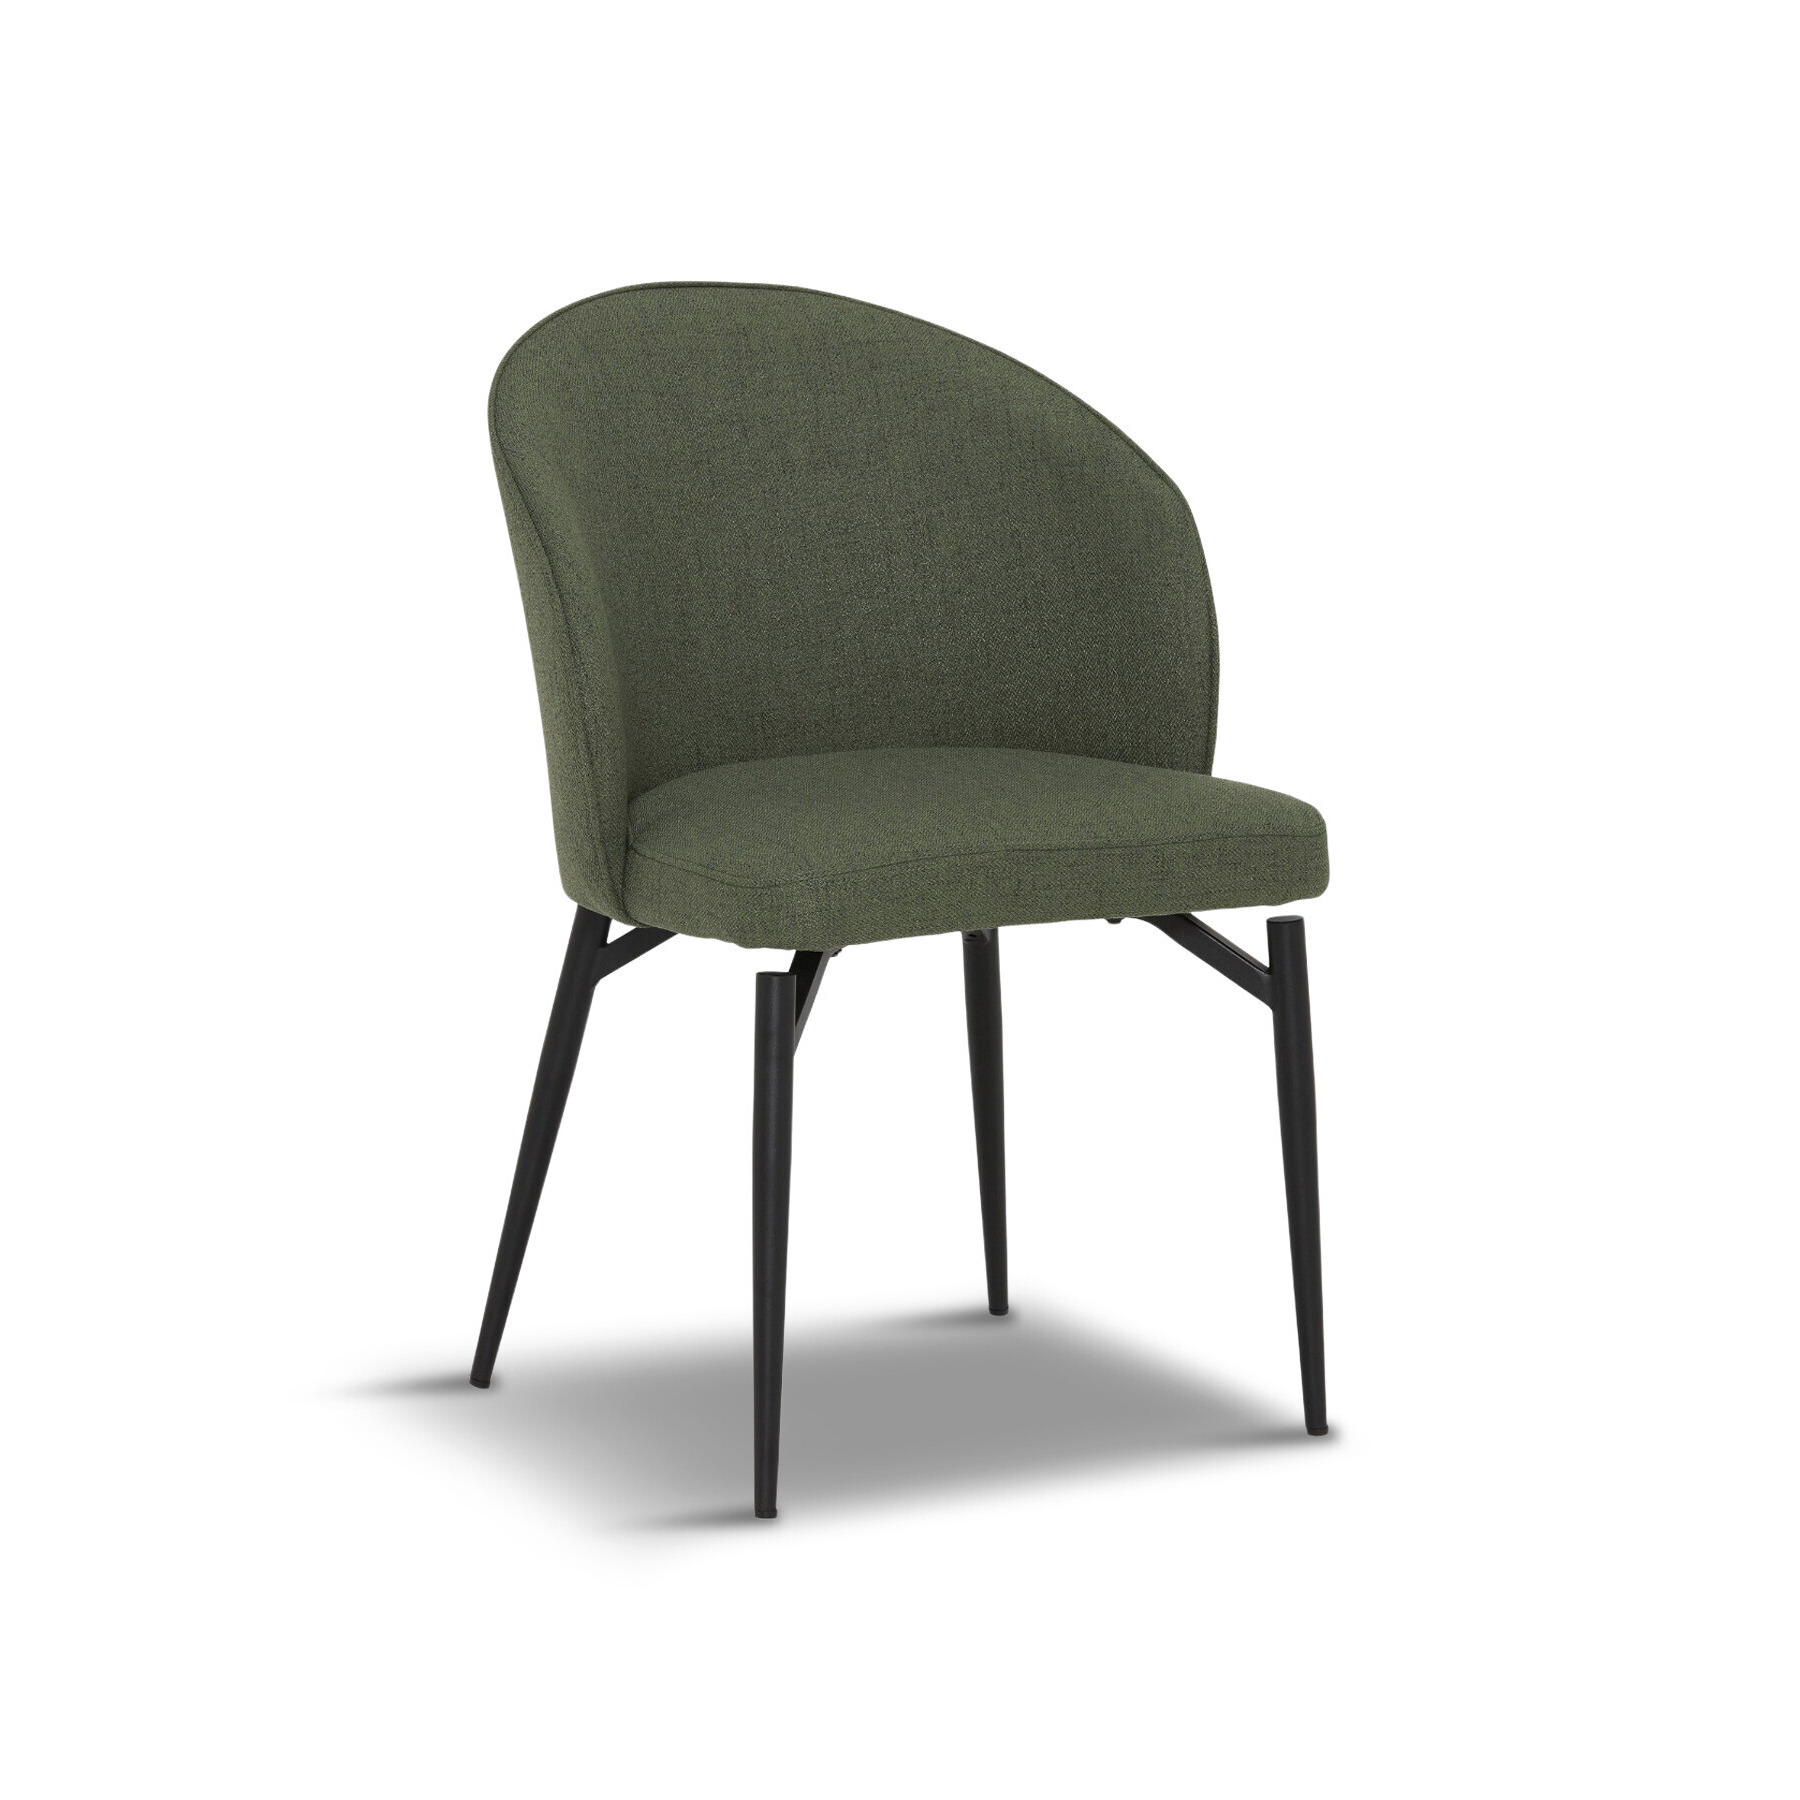 Barker and Stonehouse Lauri Green Dining Chair - image 1